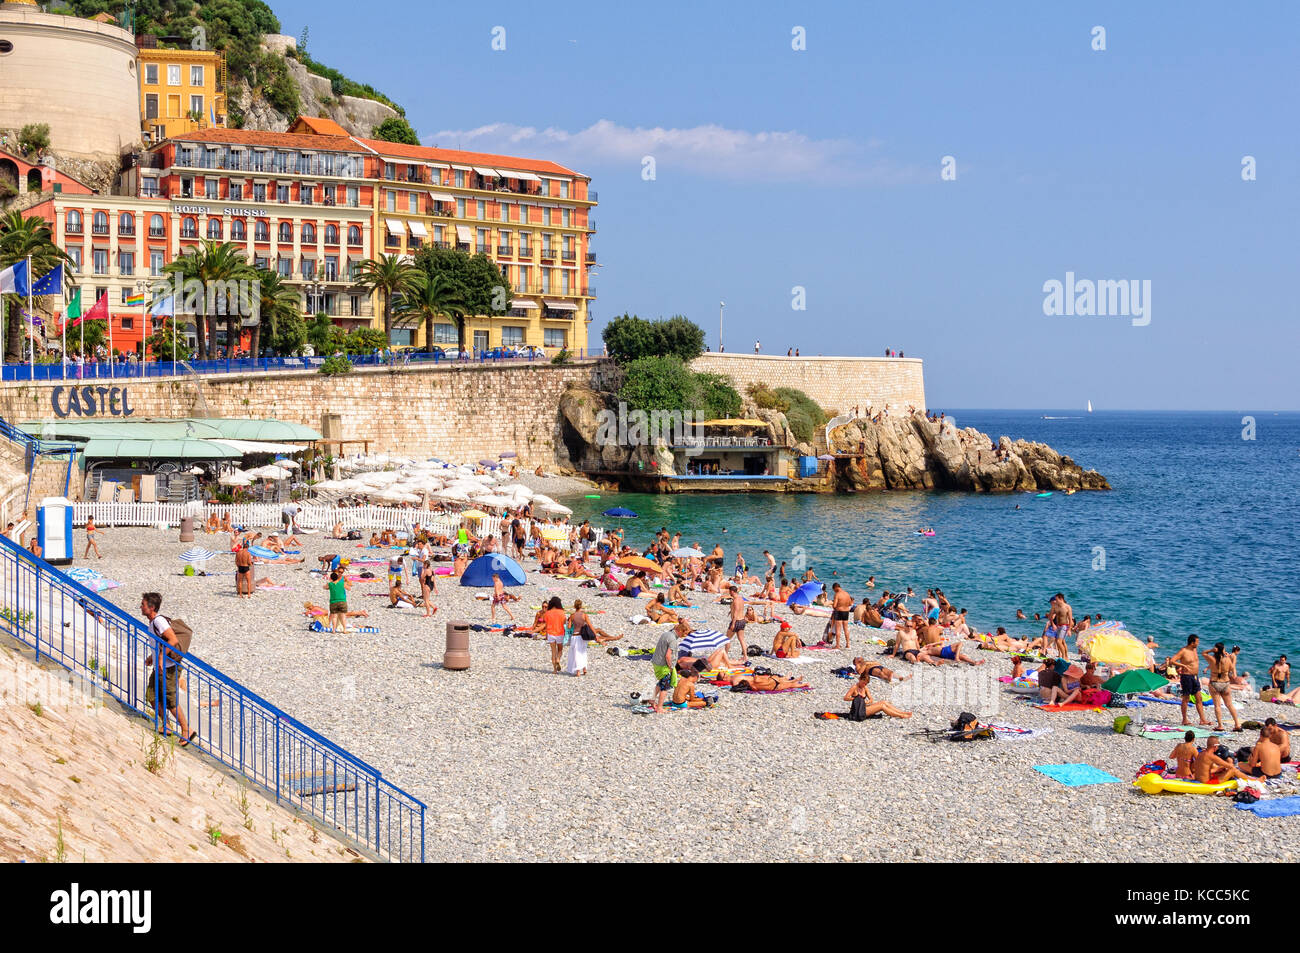 Vacationers enjoy the beautiful weather on Castel Beach - Nice, France Stock Photo